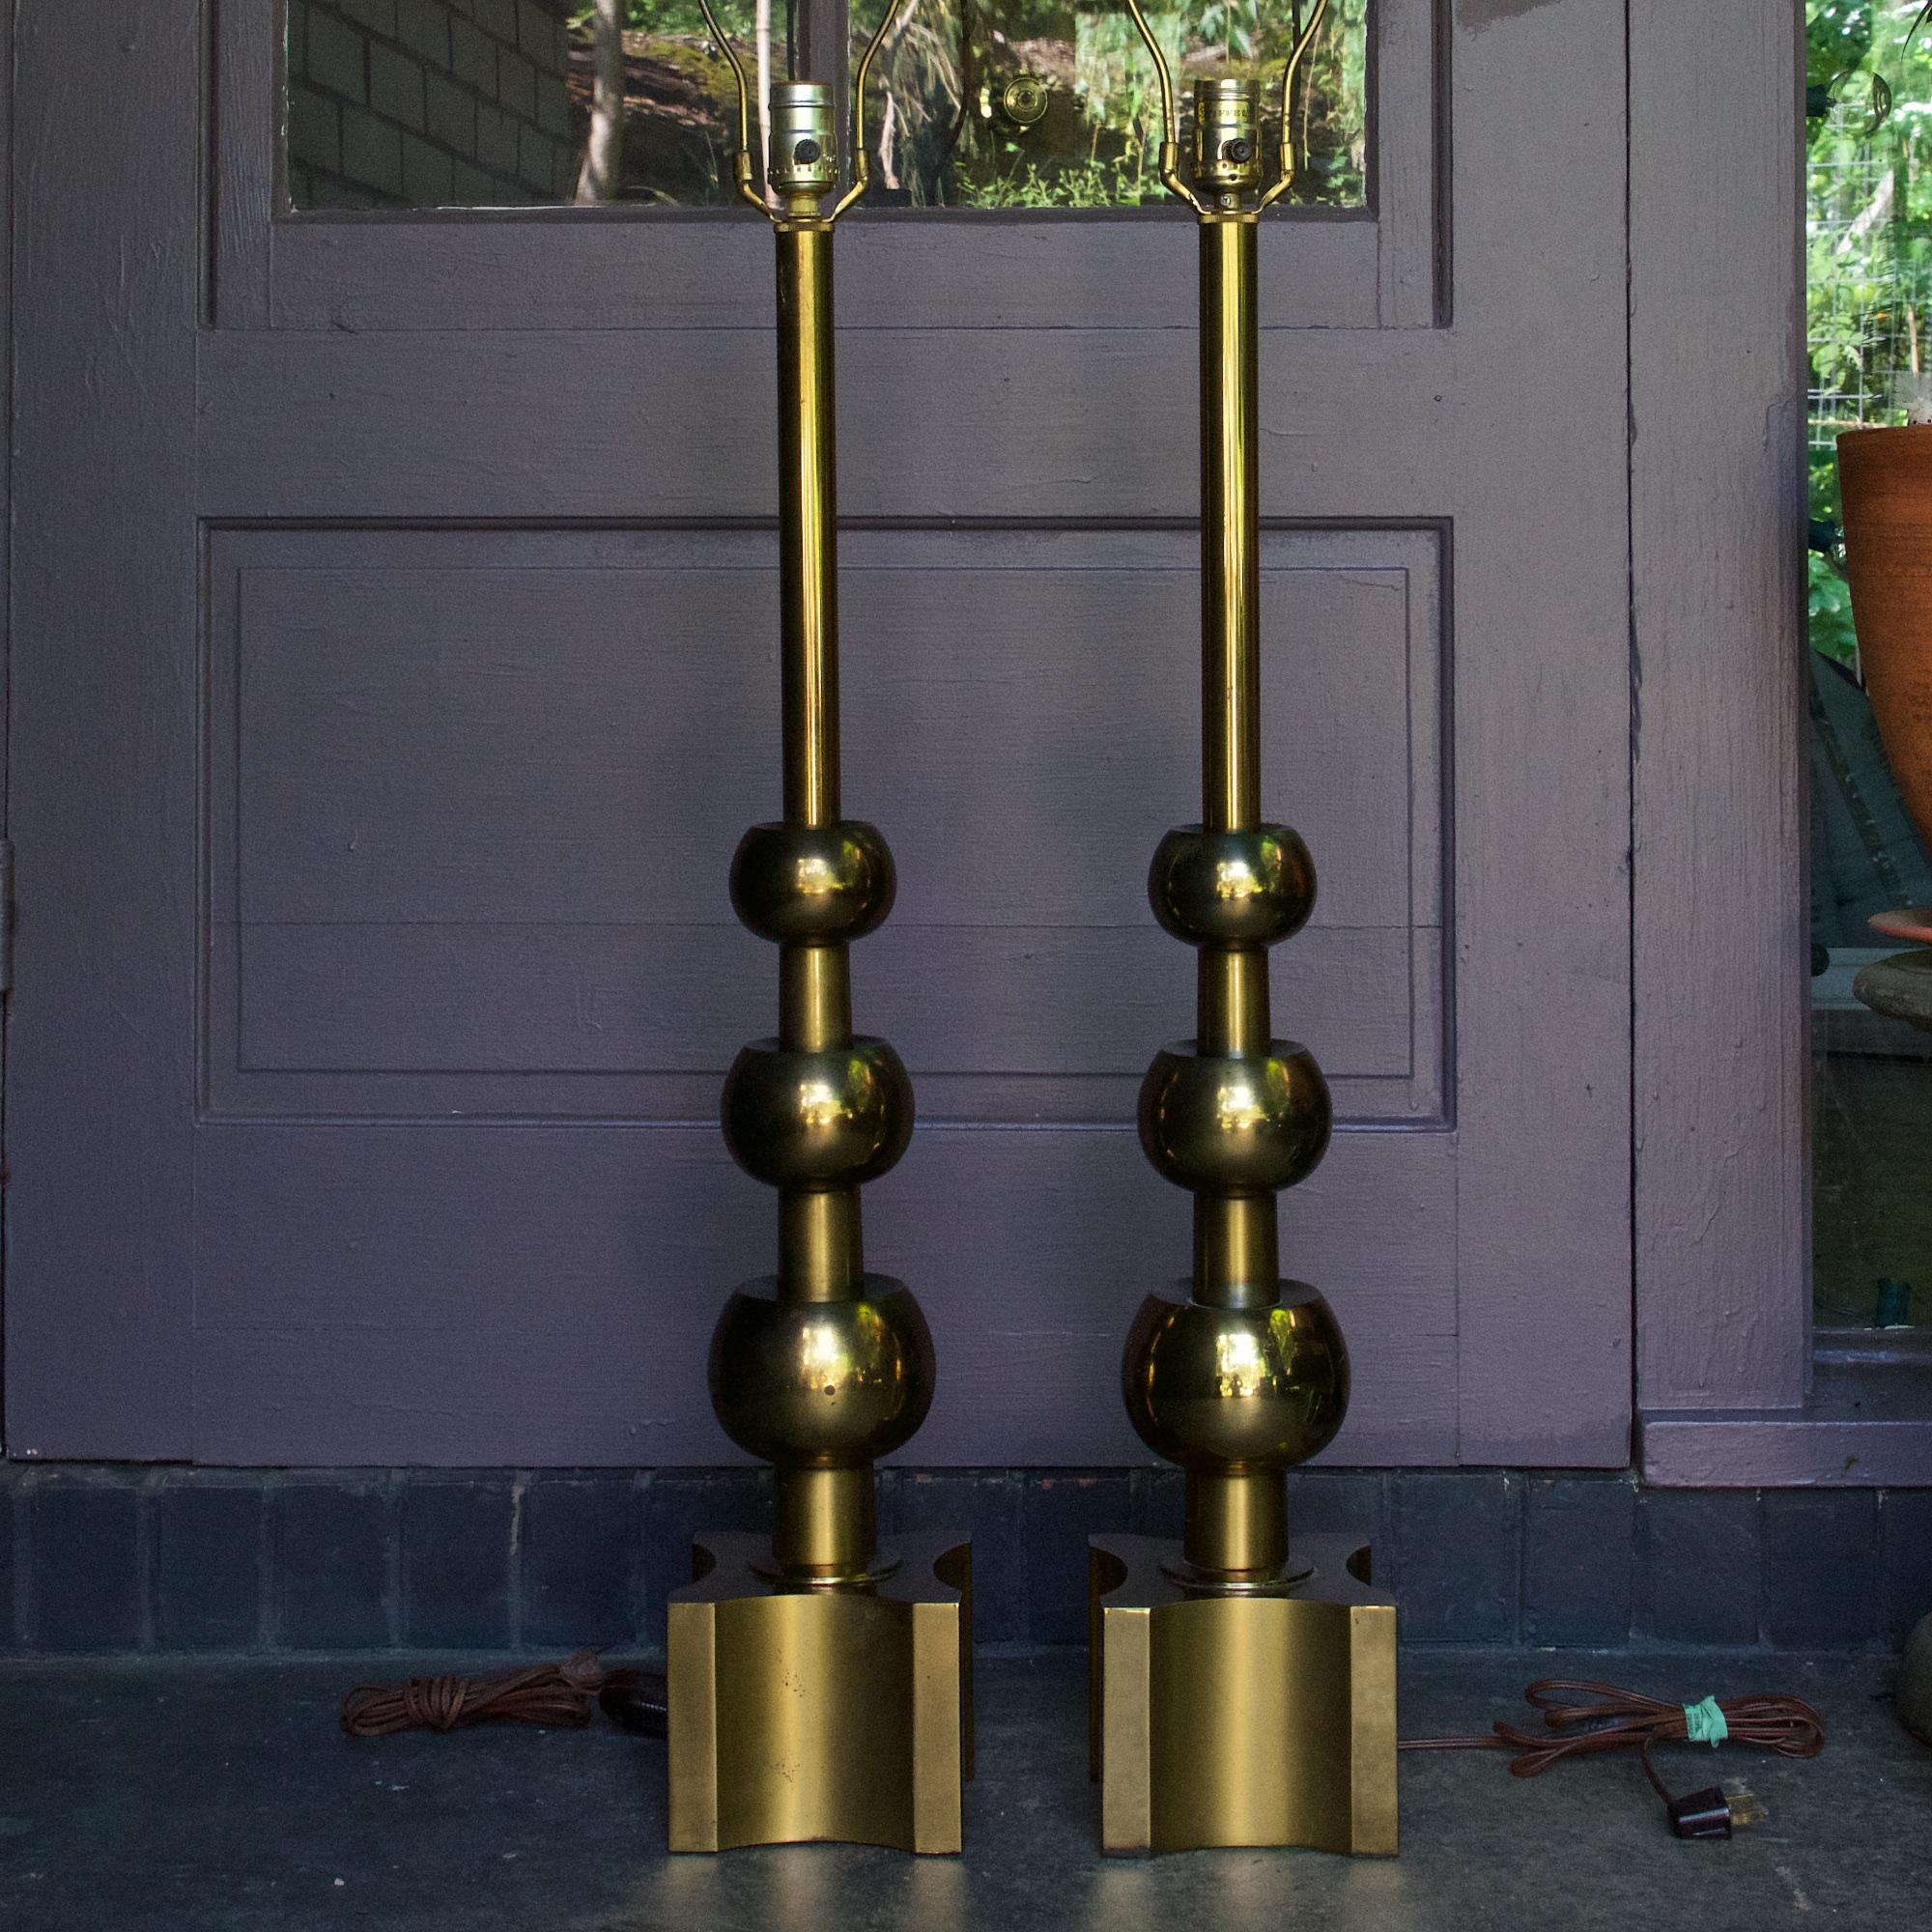 Sale is for a pair.  Heavy patina to all brass surfaces, never polished, one lamp has more atmospheric patina to the brass surface making it a bit darker than its match.  Original harps and finials.  New inner socketry with key shaped switches, see